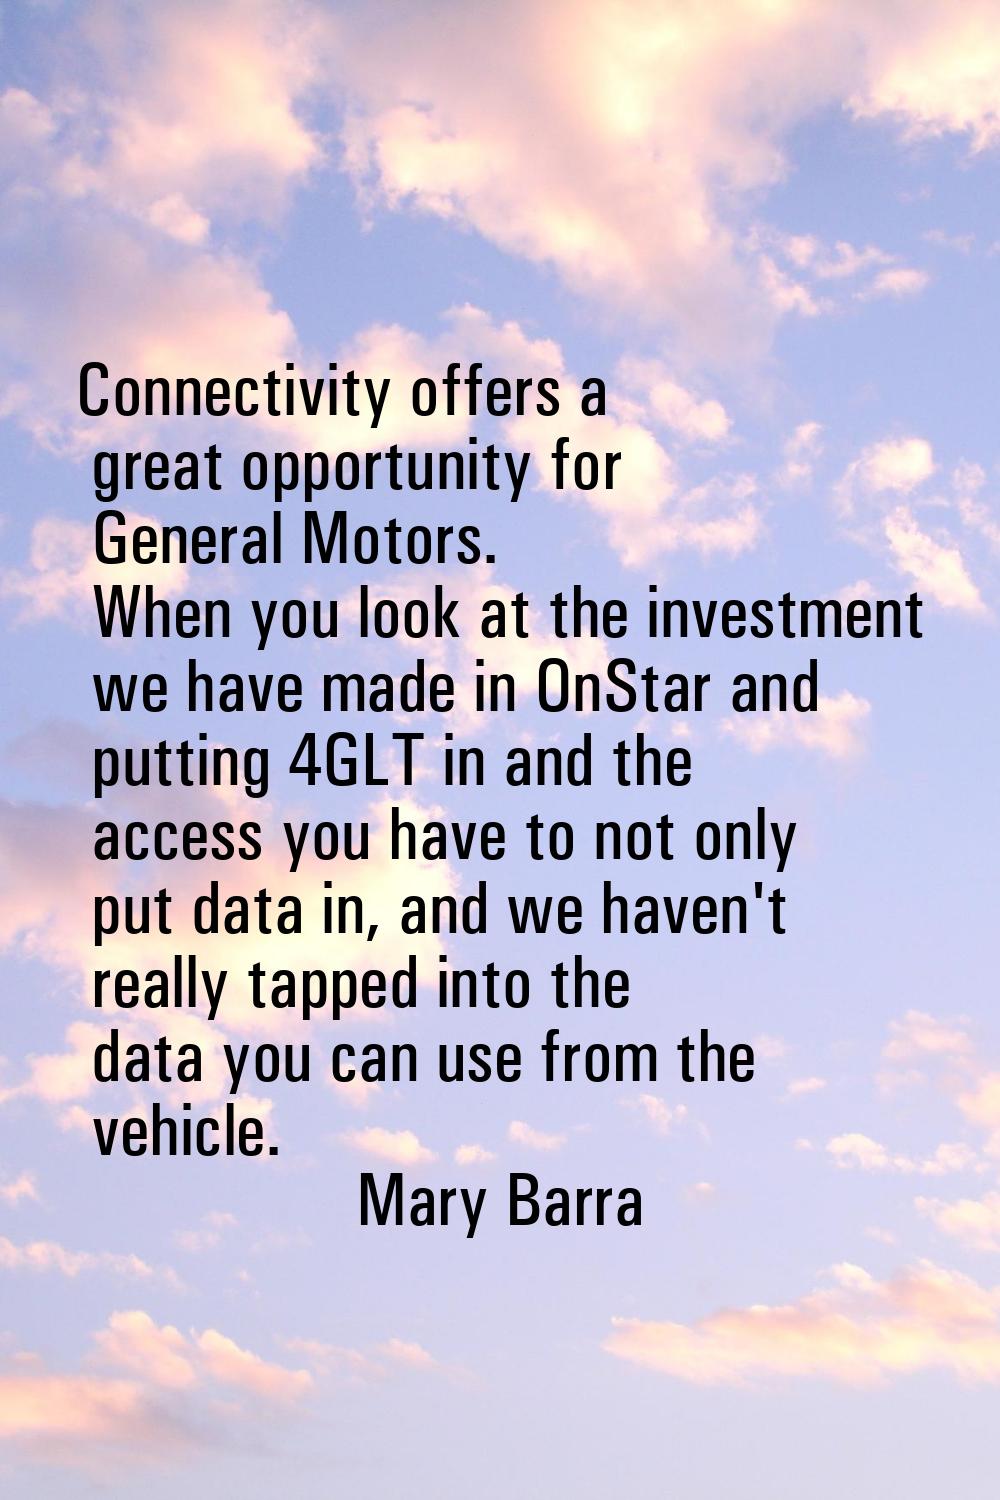 Connectivity offers a great opportunity for General Motors. When you look at the investment we have